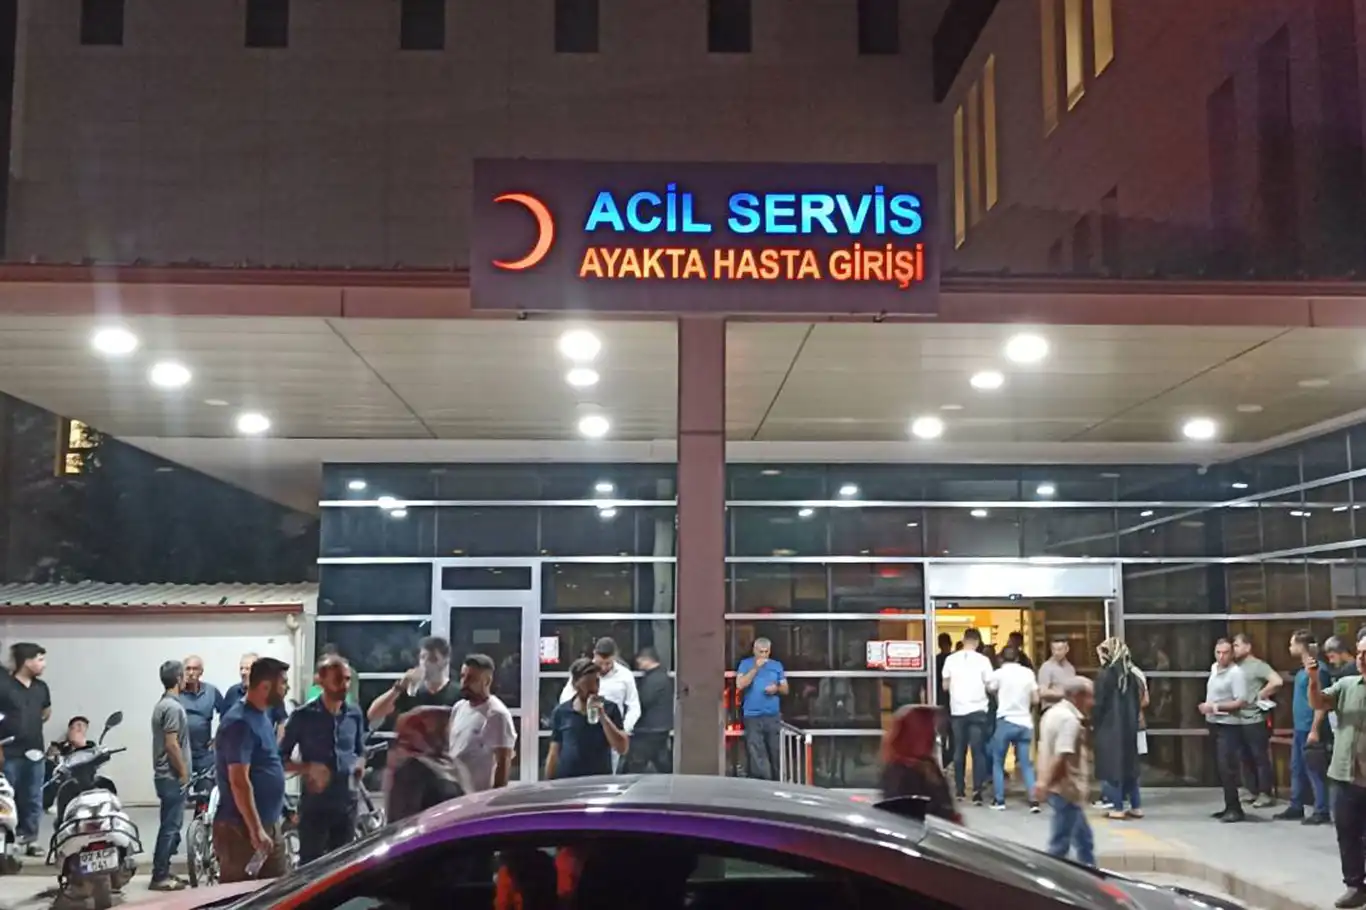 Police officer opens fire in Adıyaman station, killing and injuring colleagues